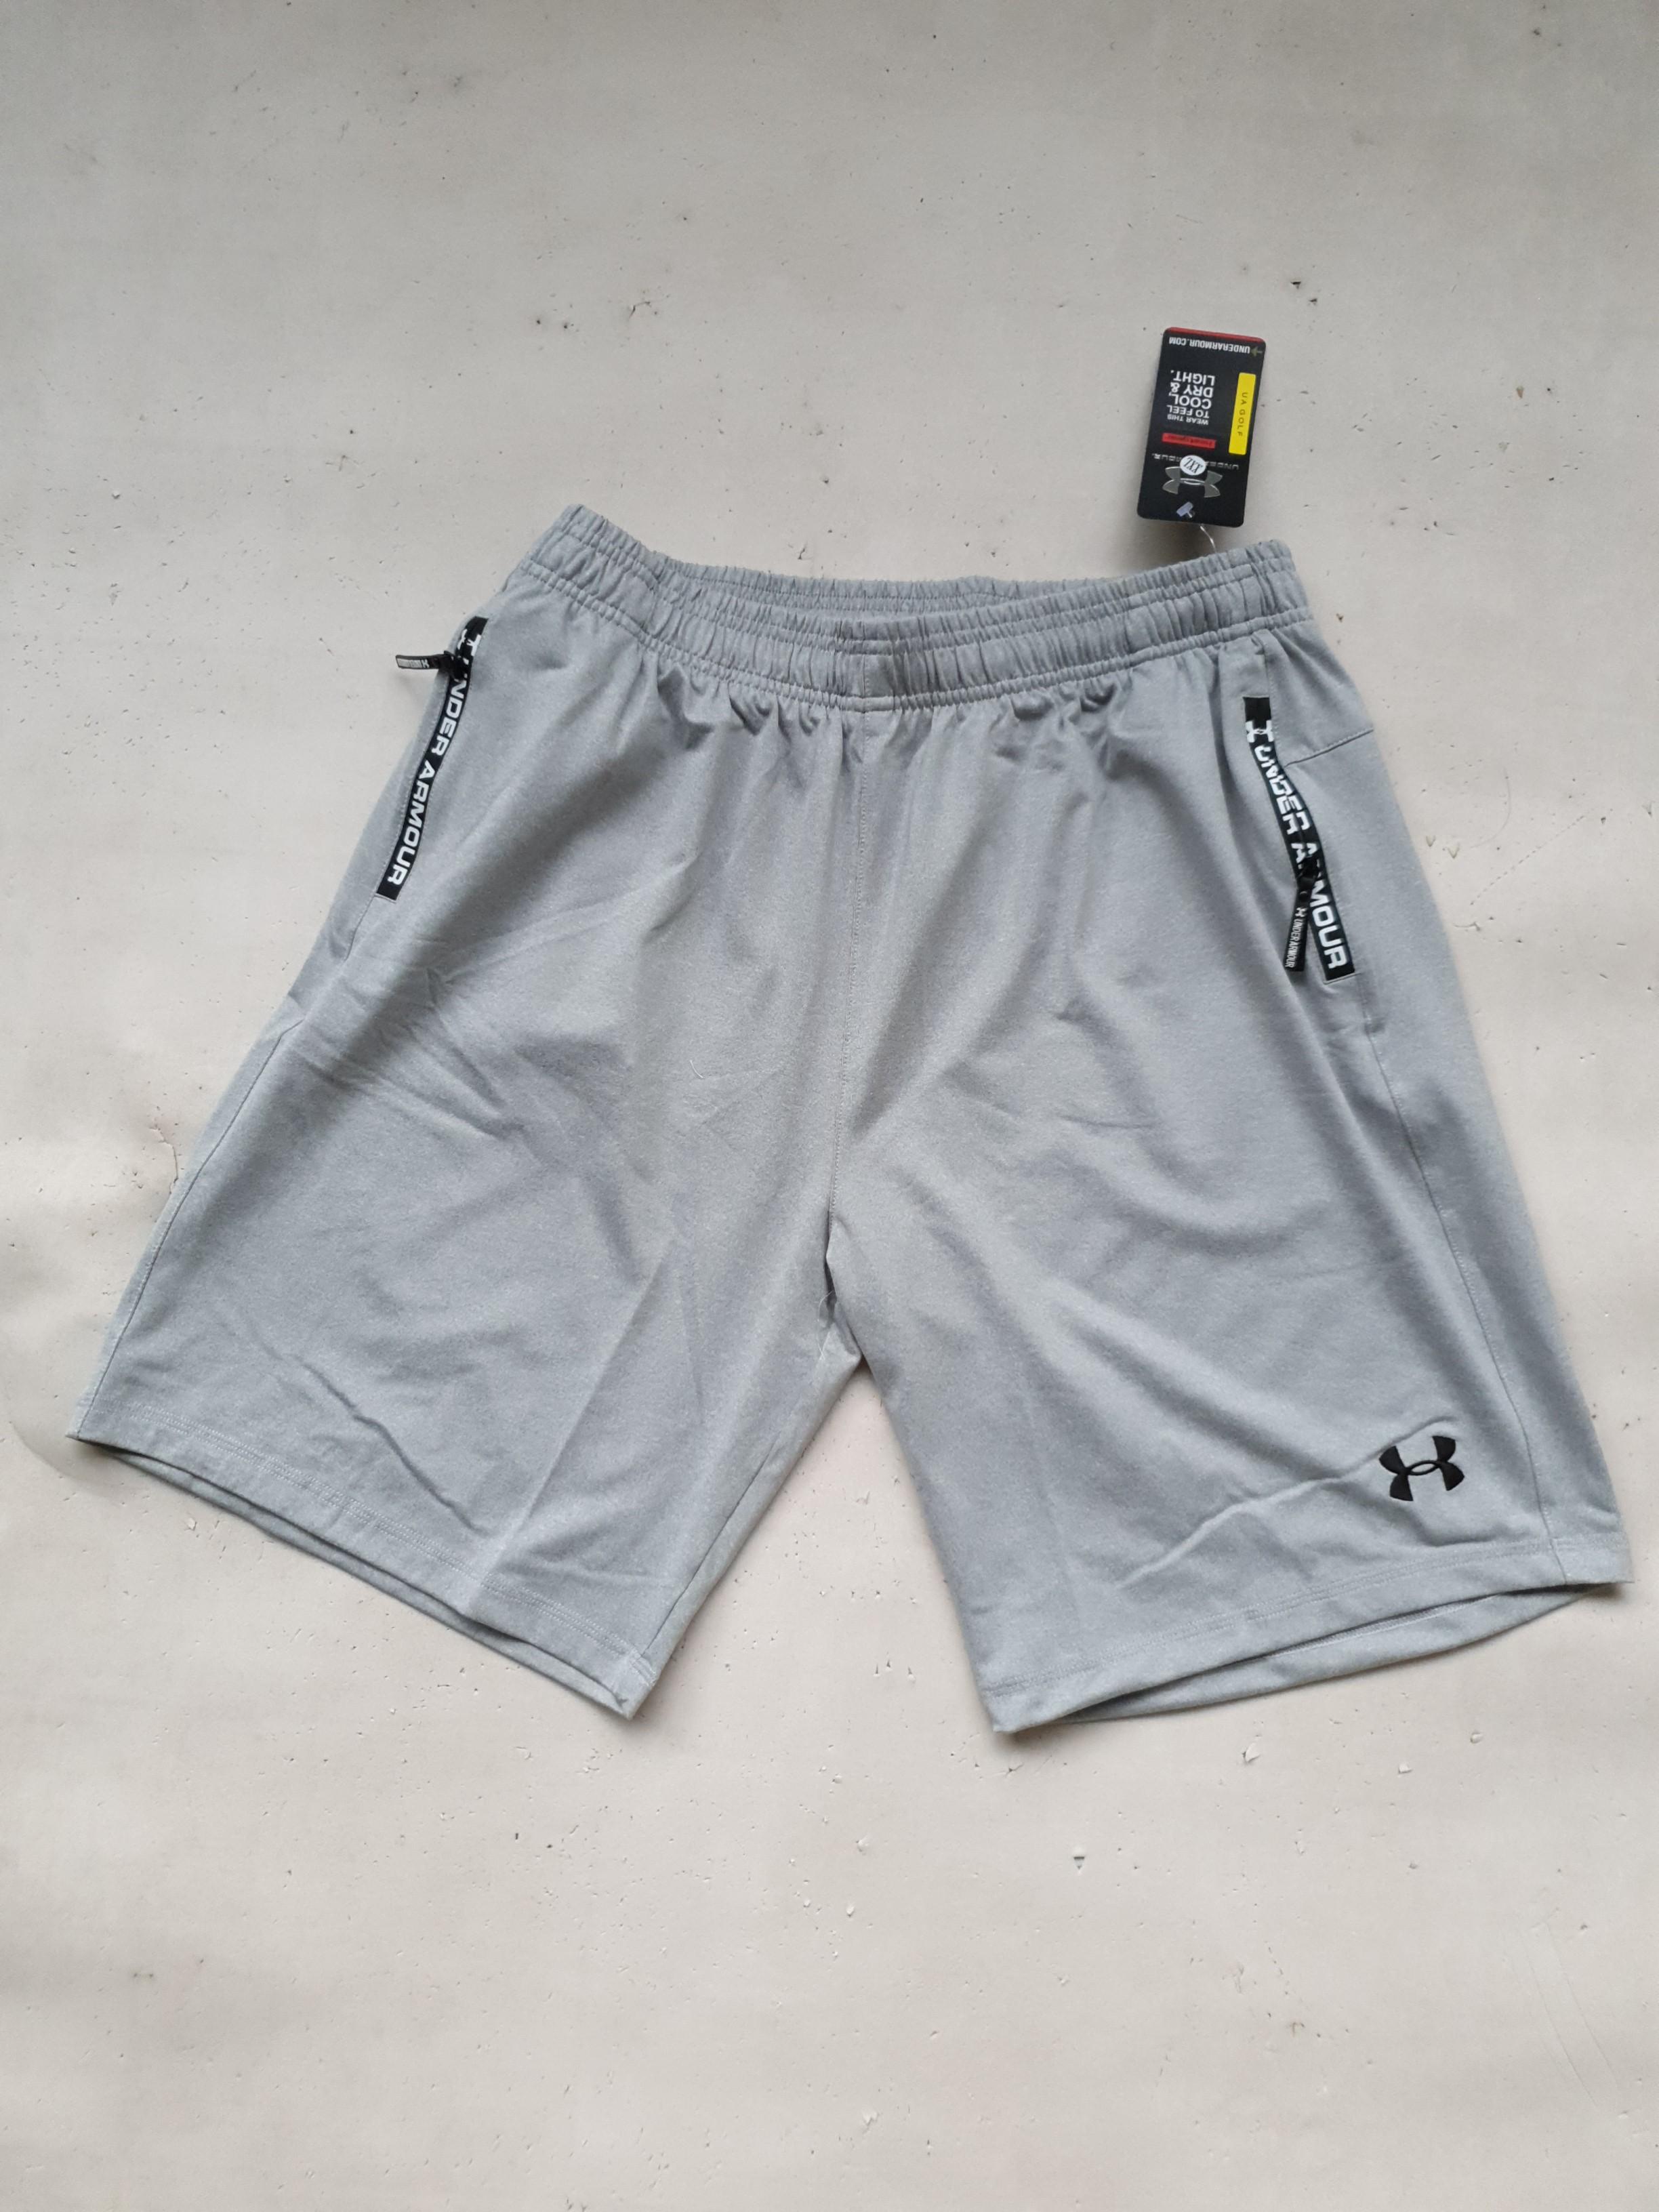 under armour shorts with zipper pockets